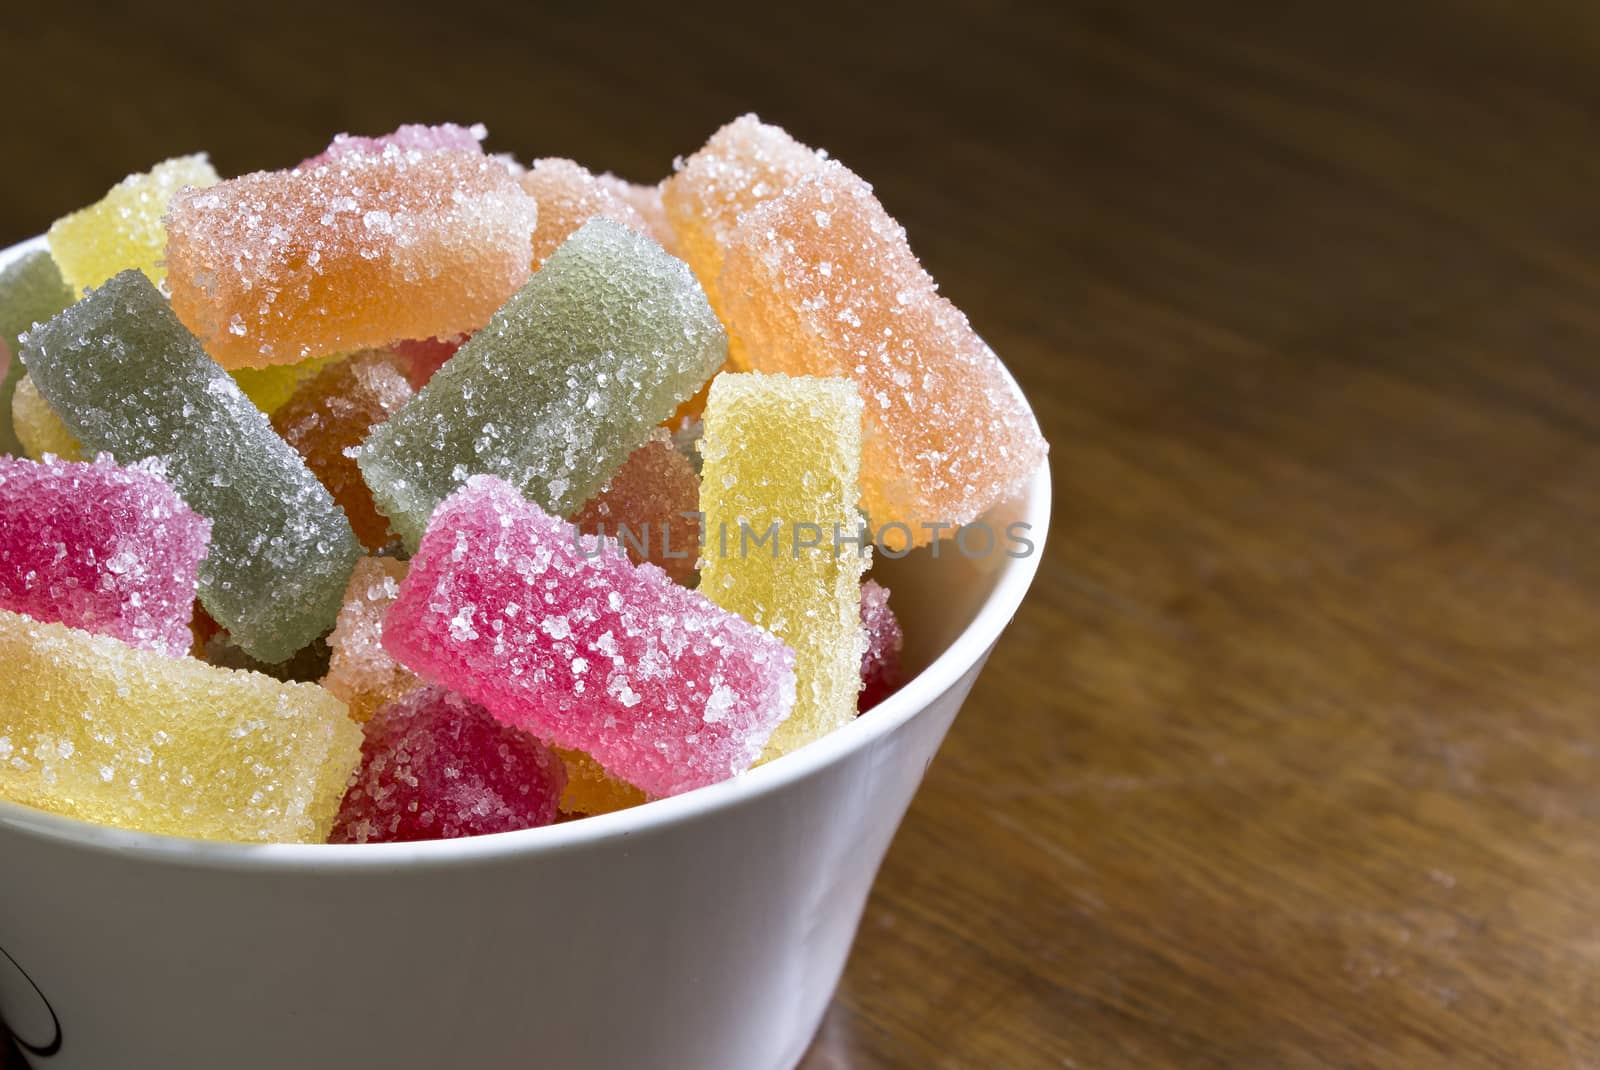 Jelly sweets in a bowl on a wooden table